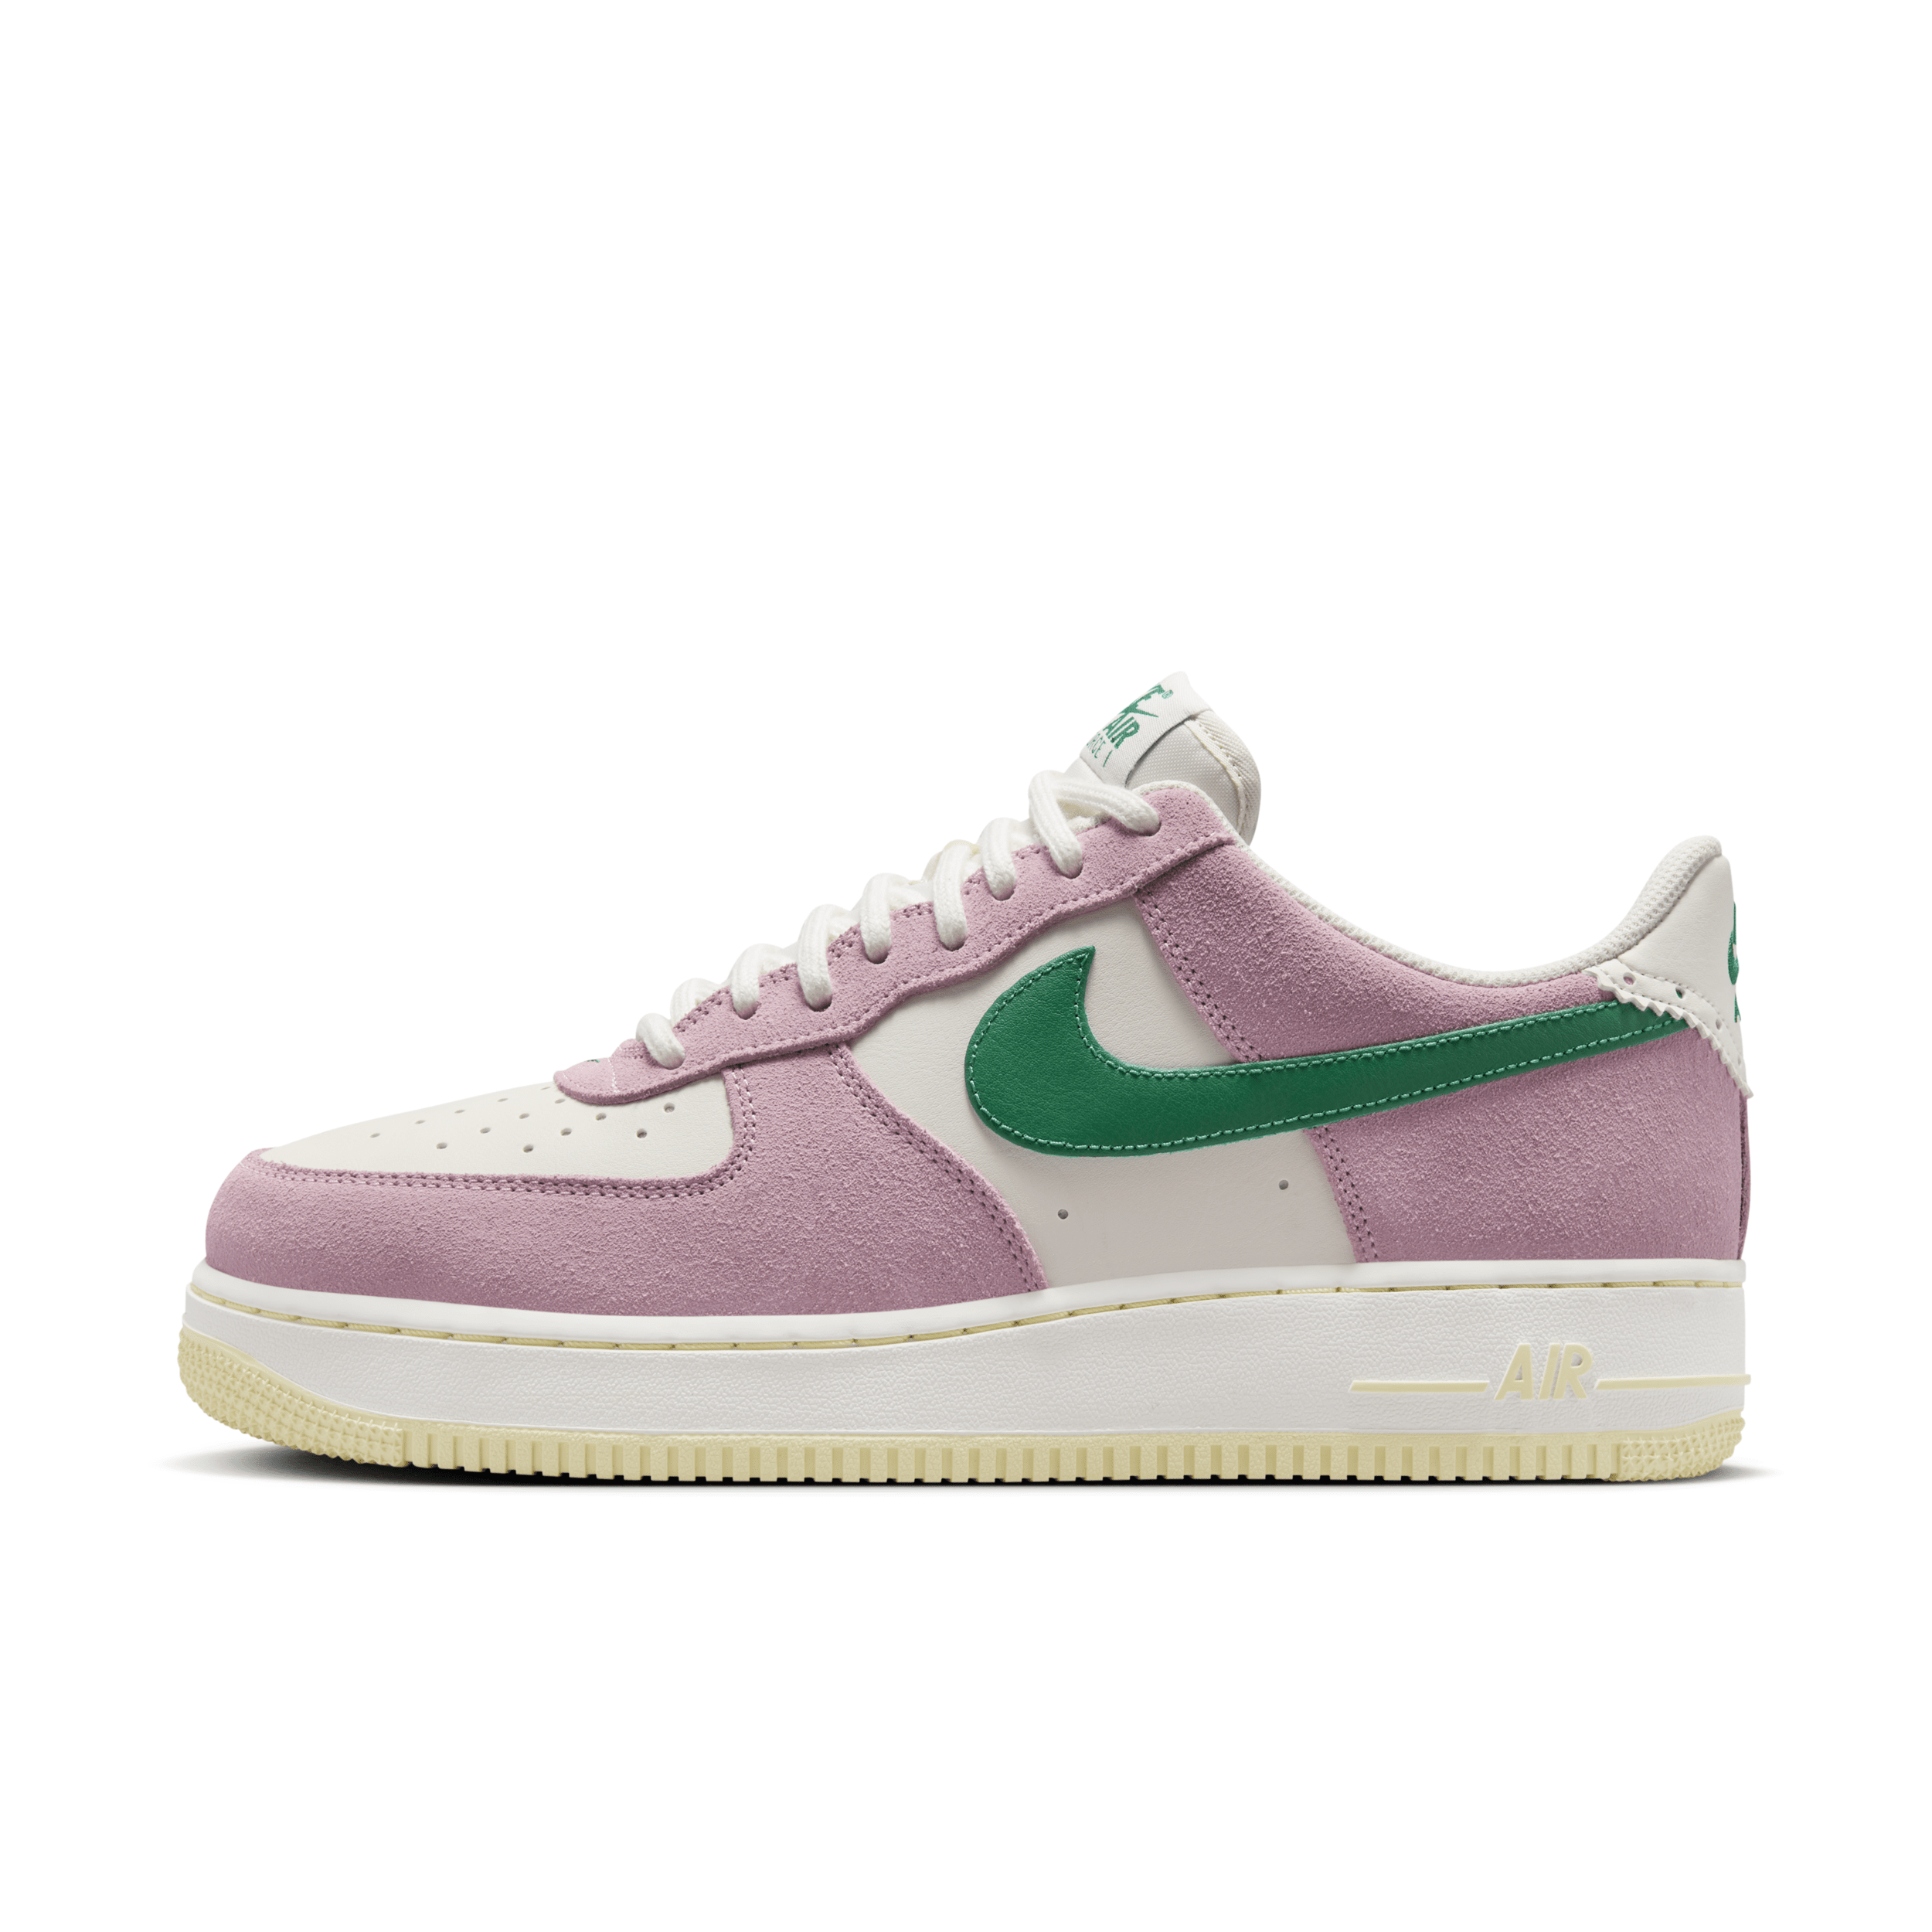 Shop Nike Men's Air Force 1 '07 Lv8 Shoes In White